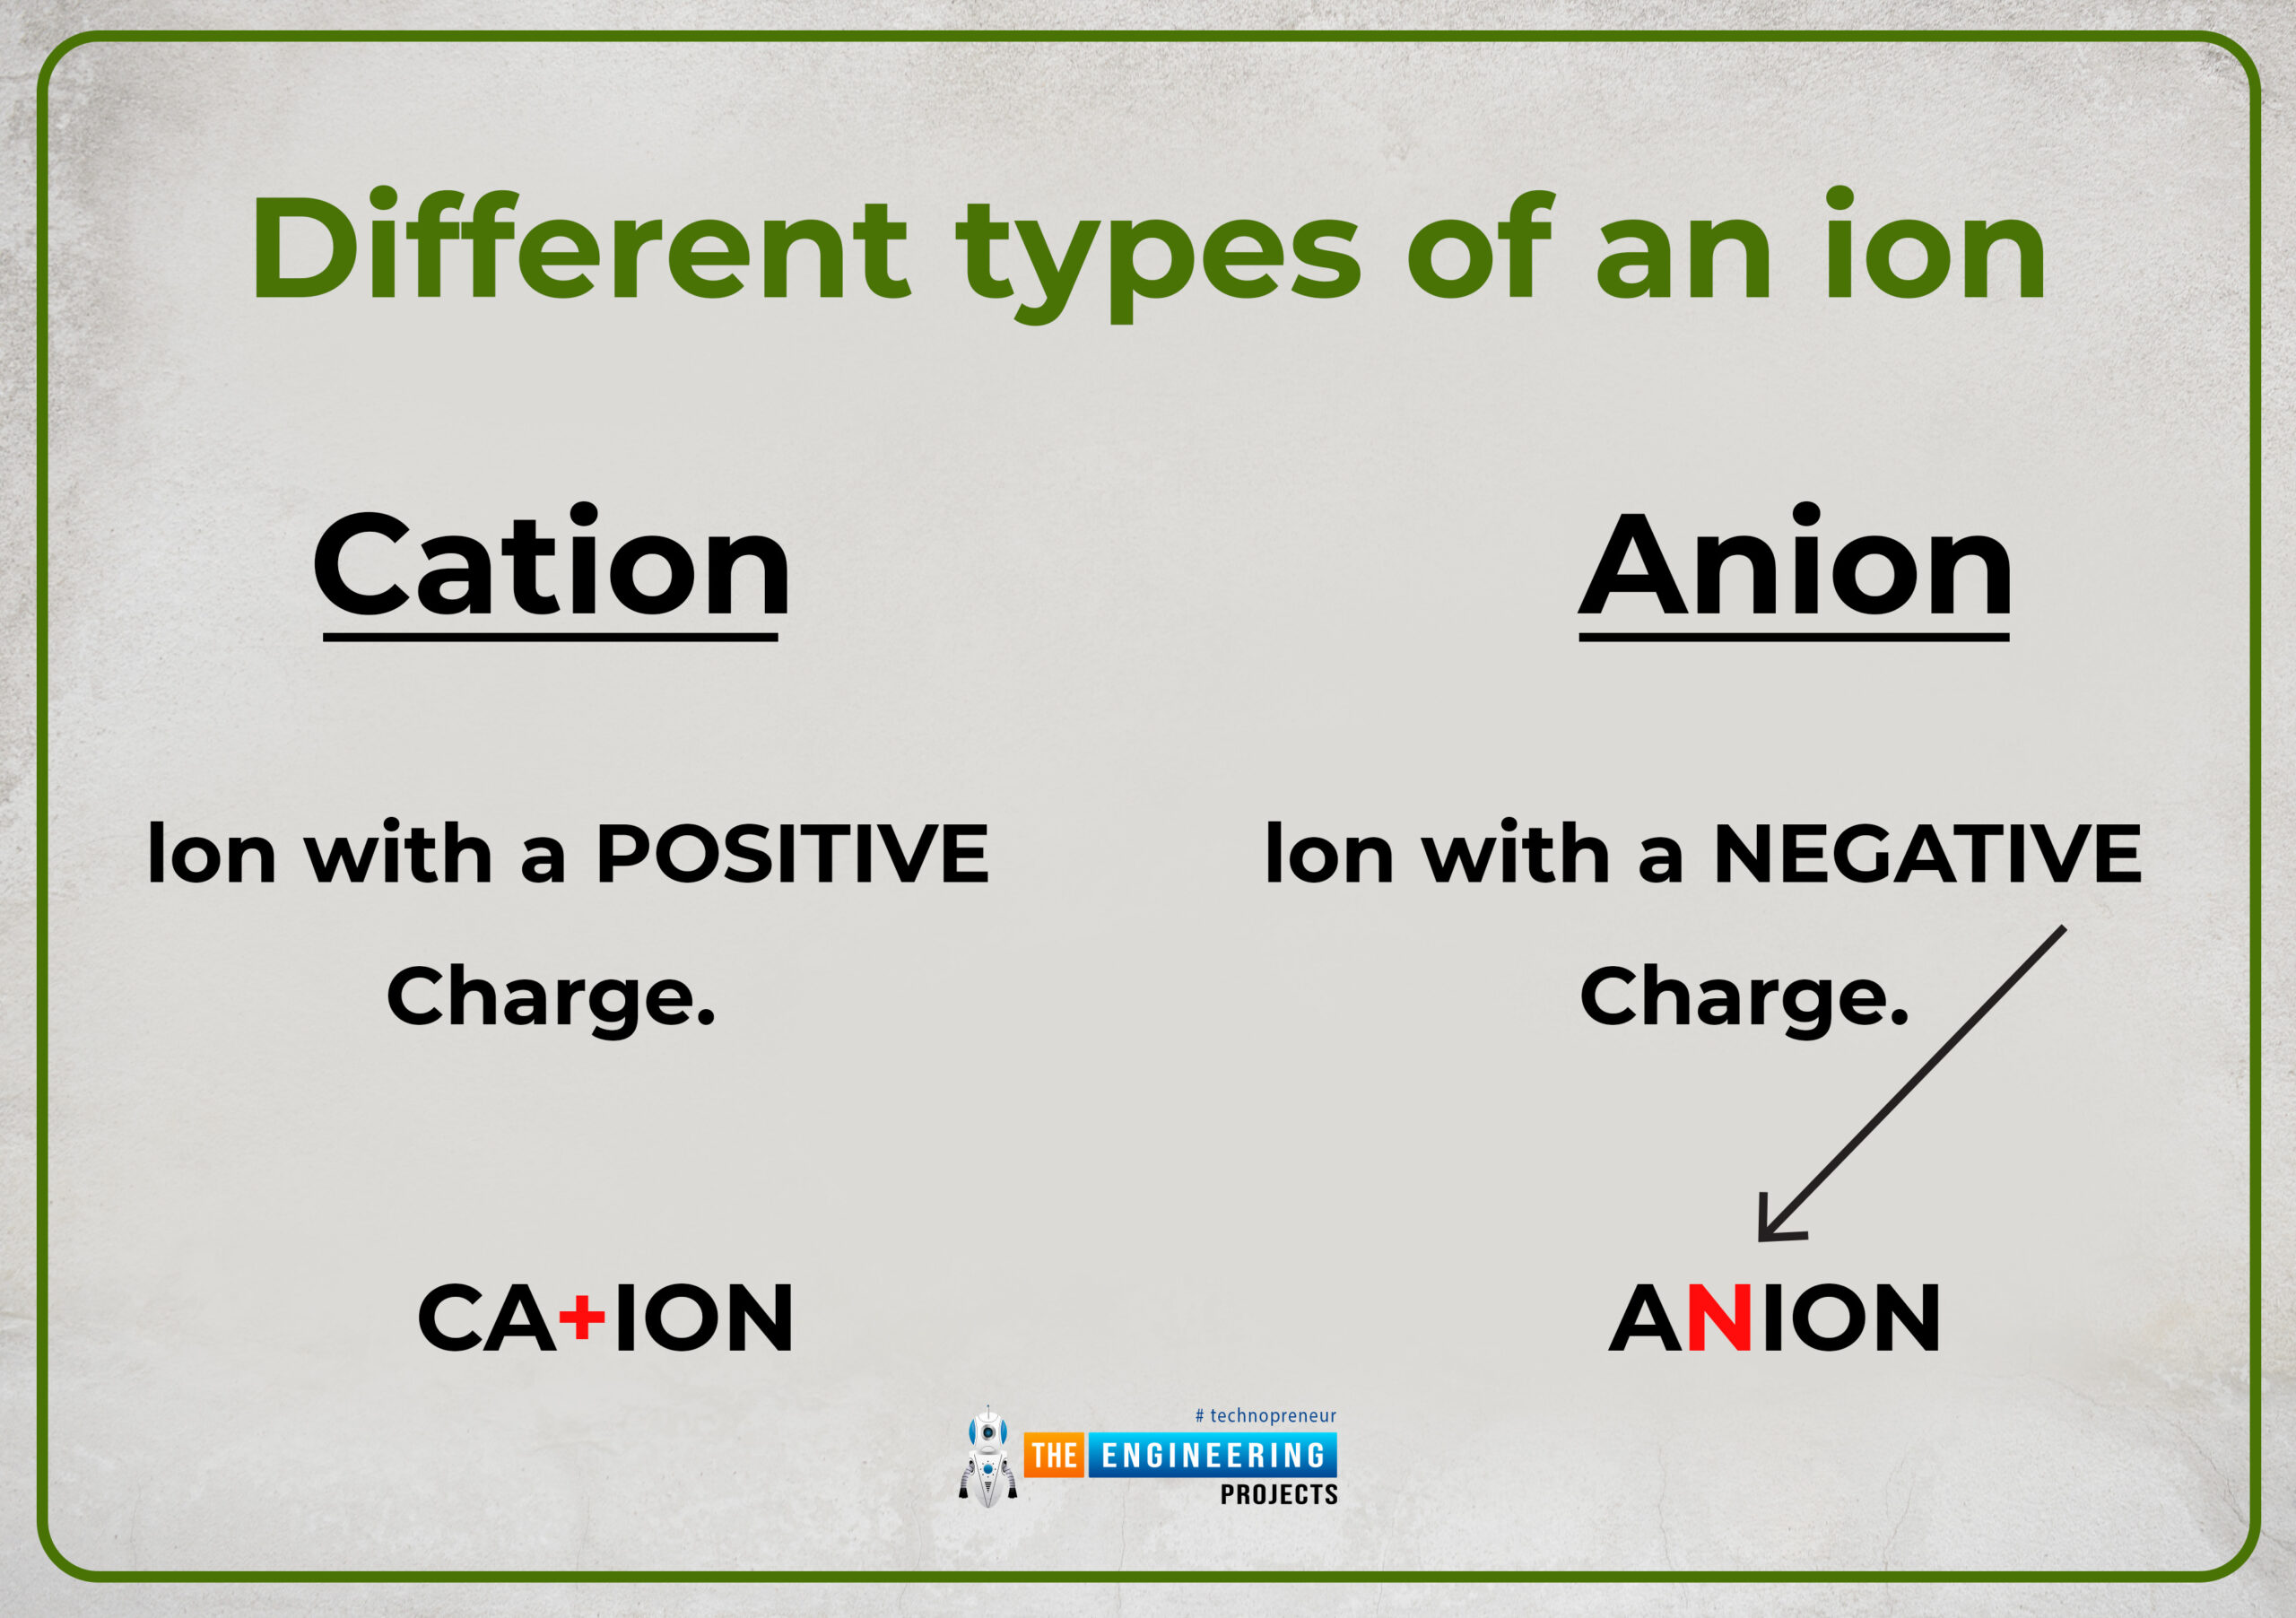 what is ion, types of ion, basics of ion, ions intro, ions basics, ions structure, ions construction, ions bonding, ions